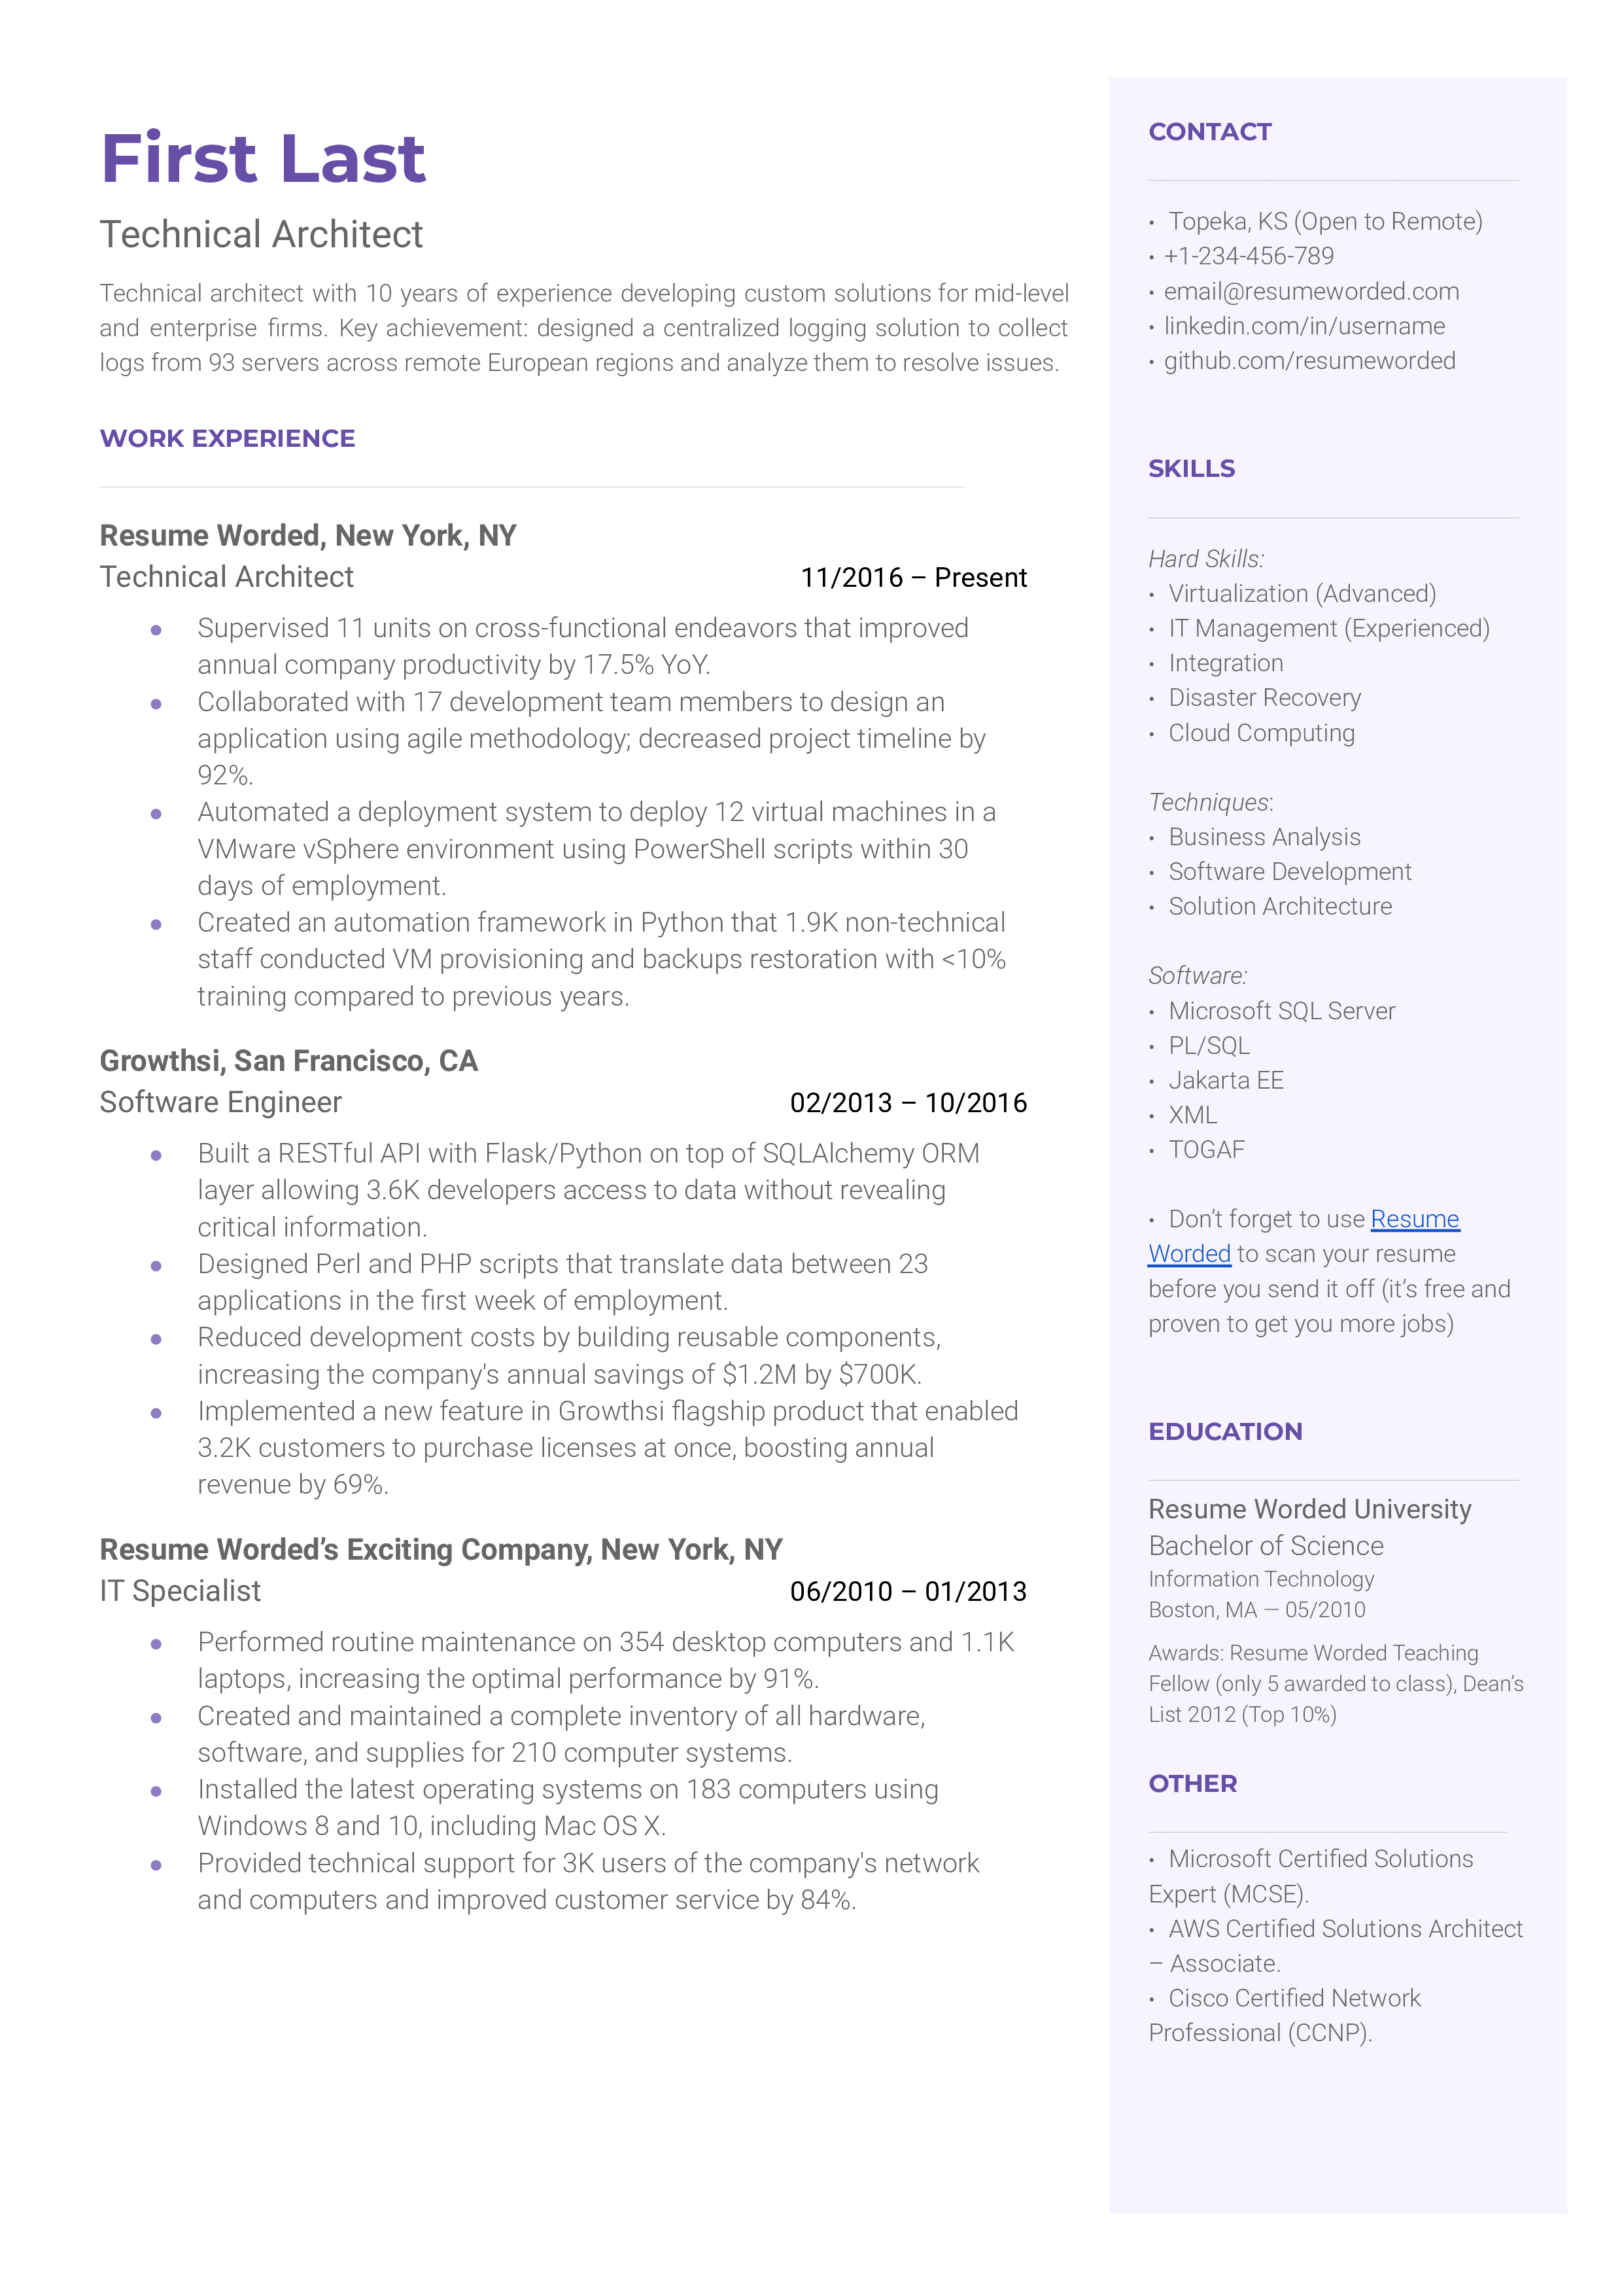 A technical architect resume template including a brief professional description, work experience, and skills section